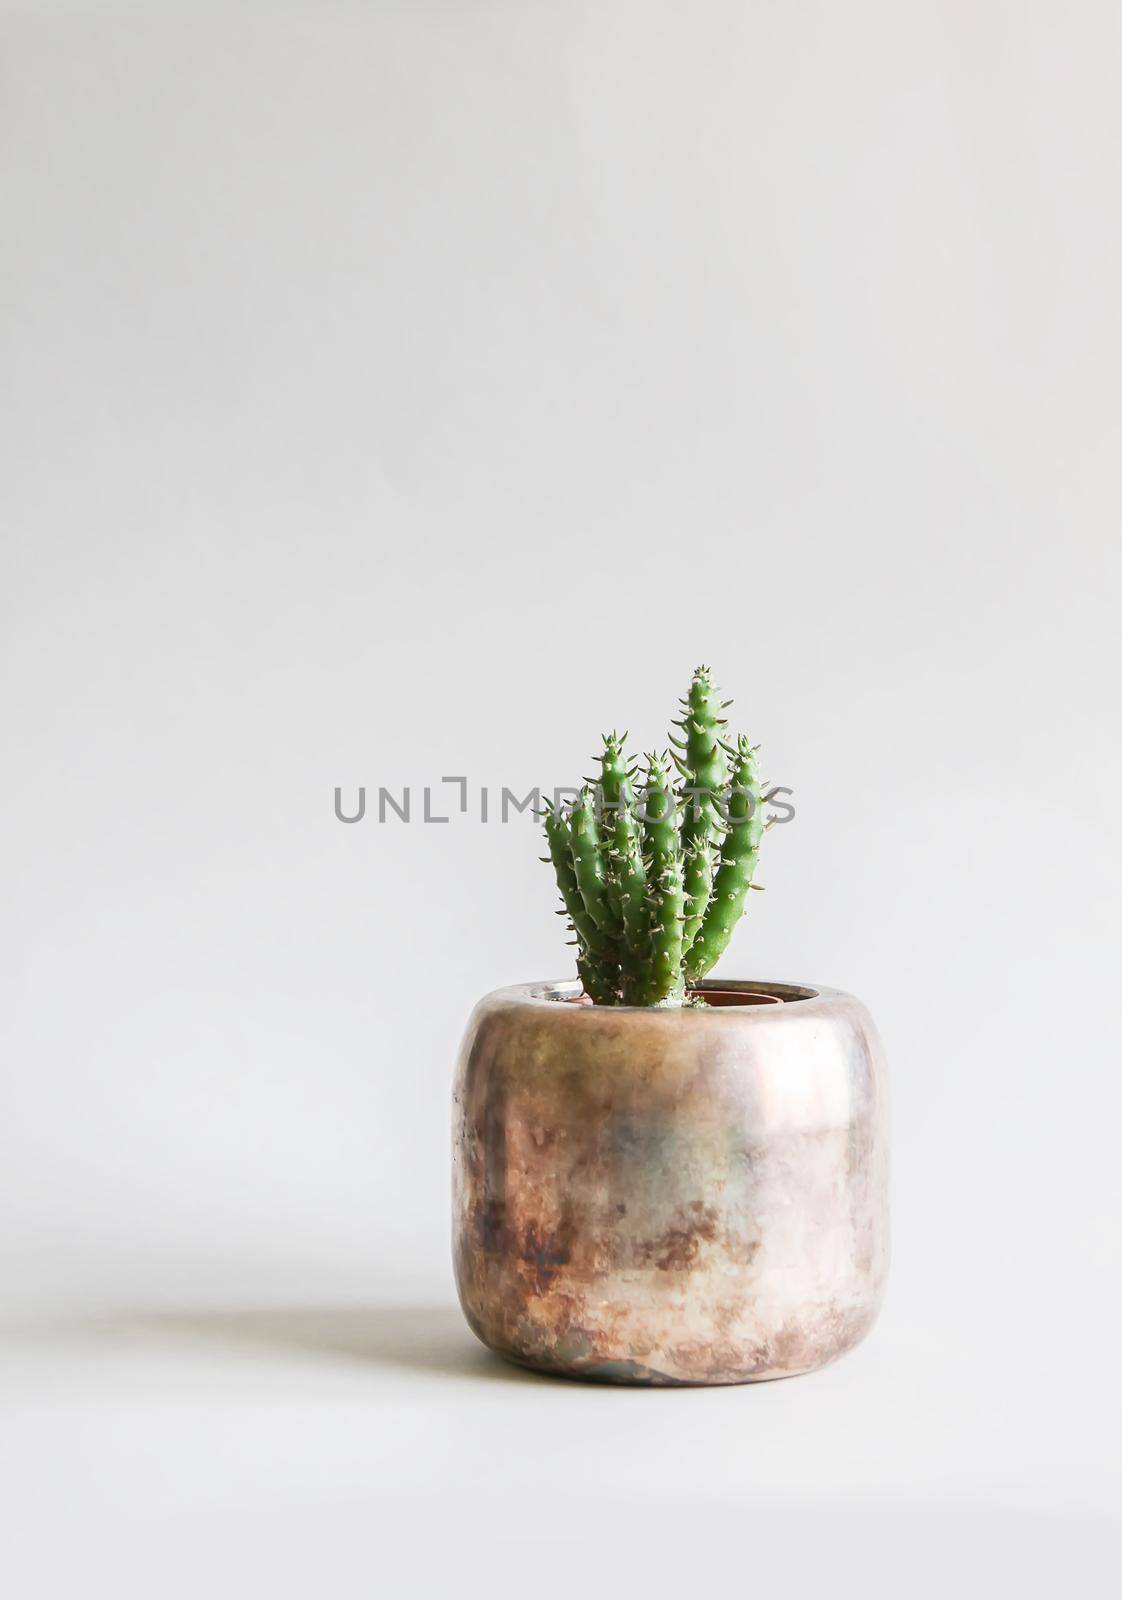 Cactus in the copper pot. Decorative plant in minimalistic modern room interior by nightlyviolet